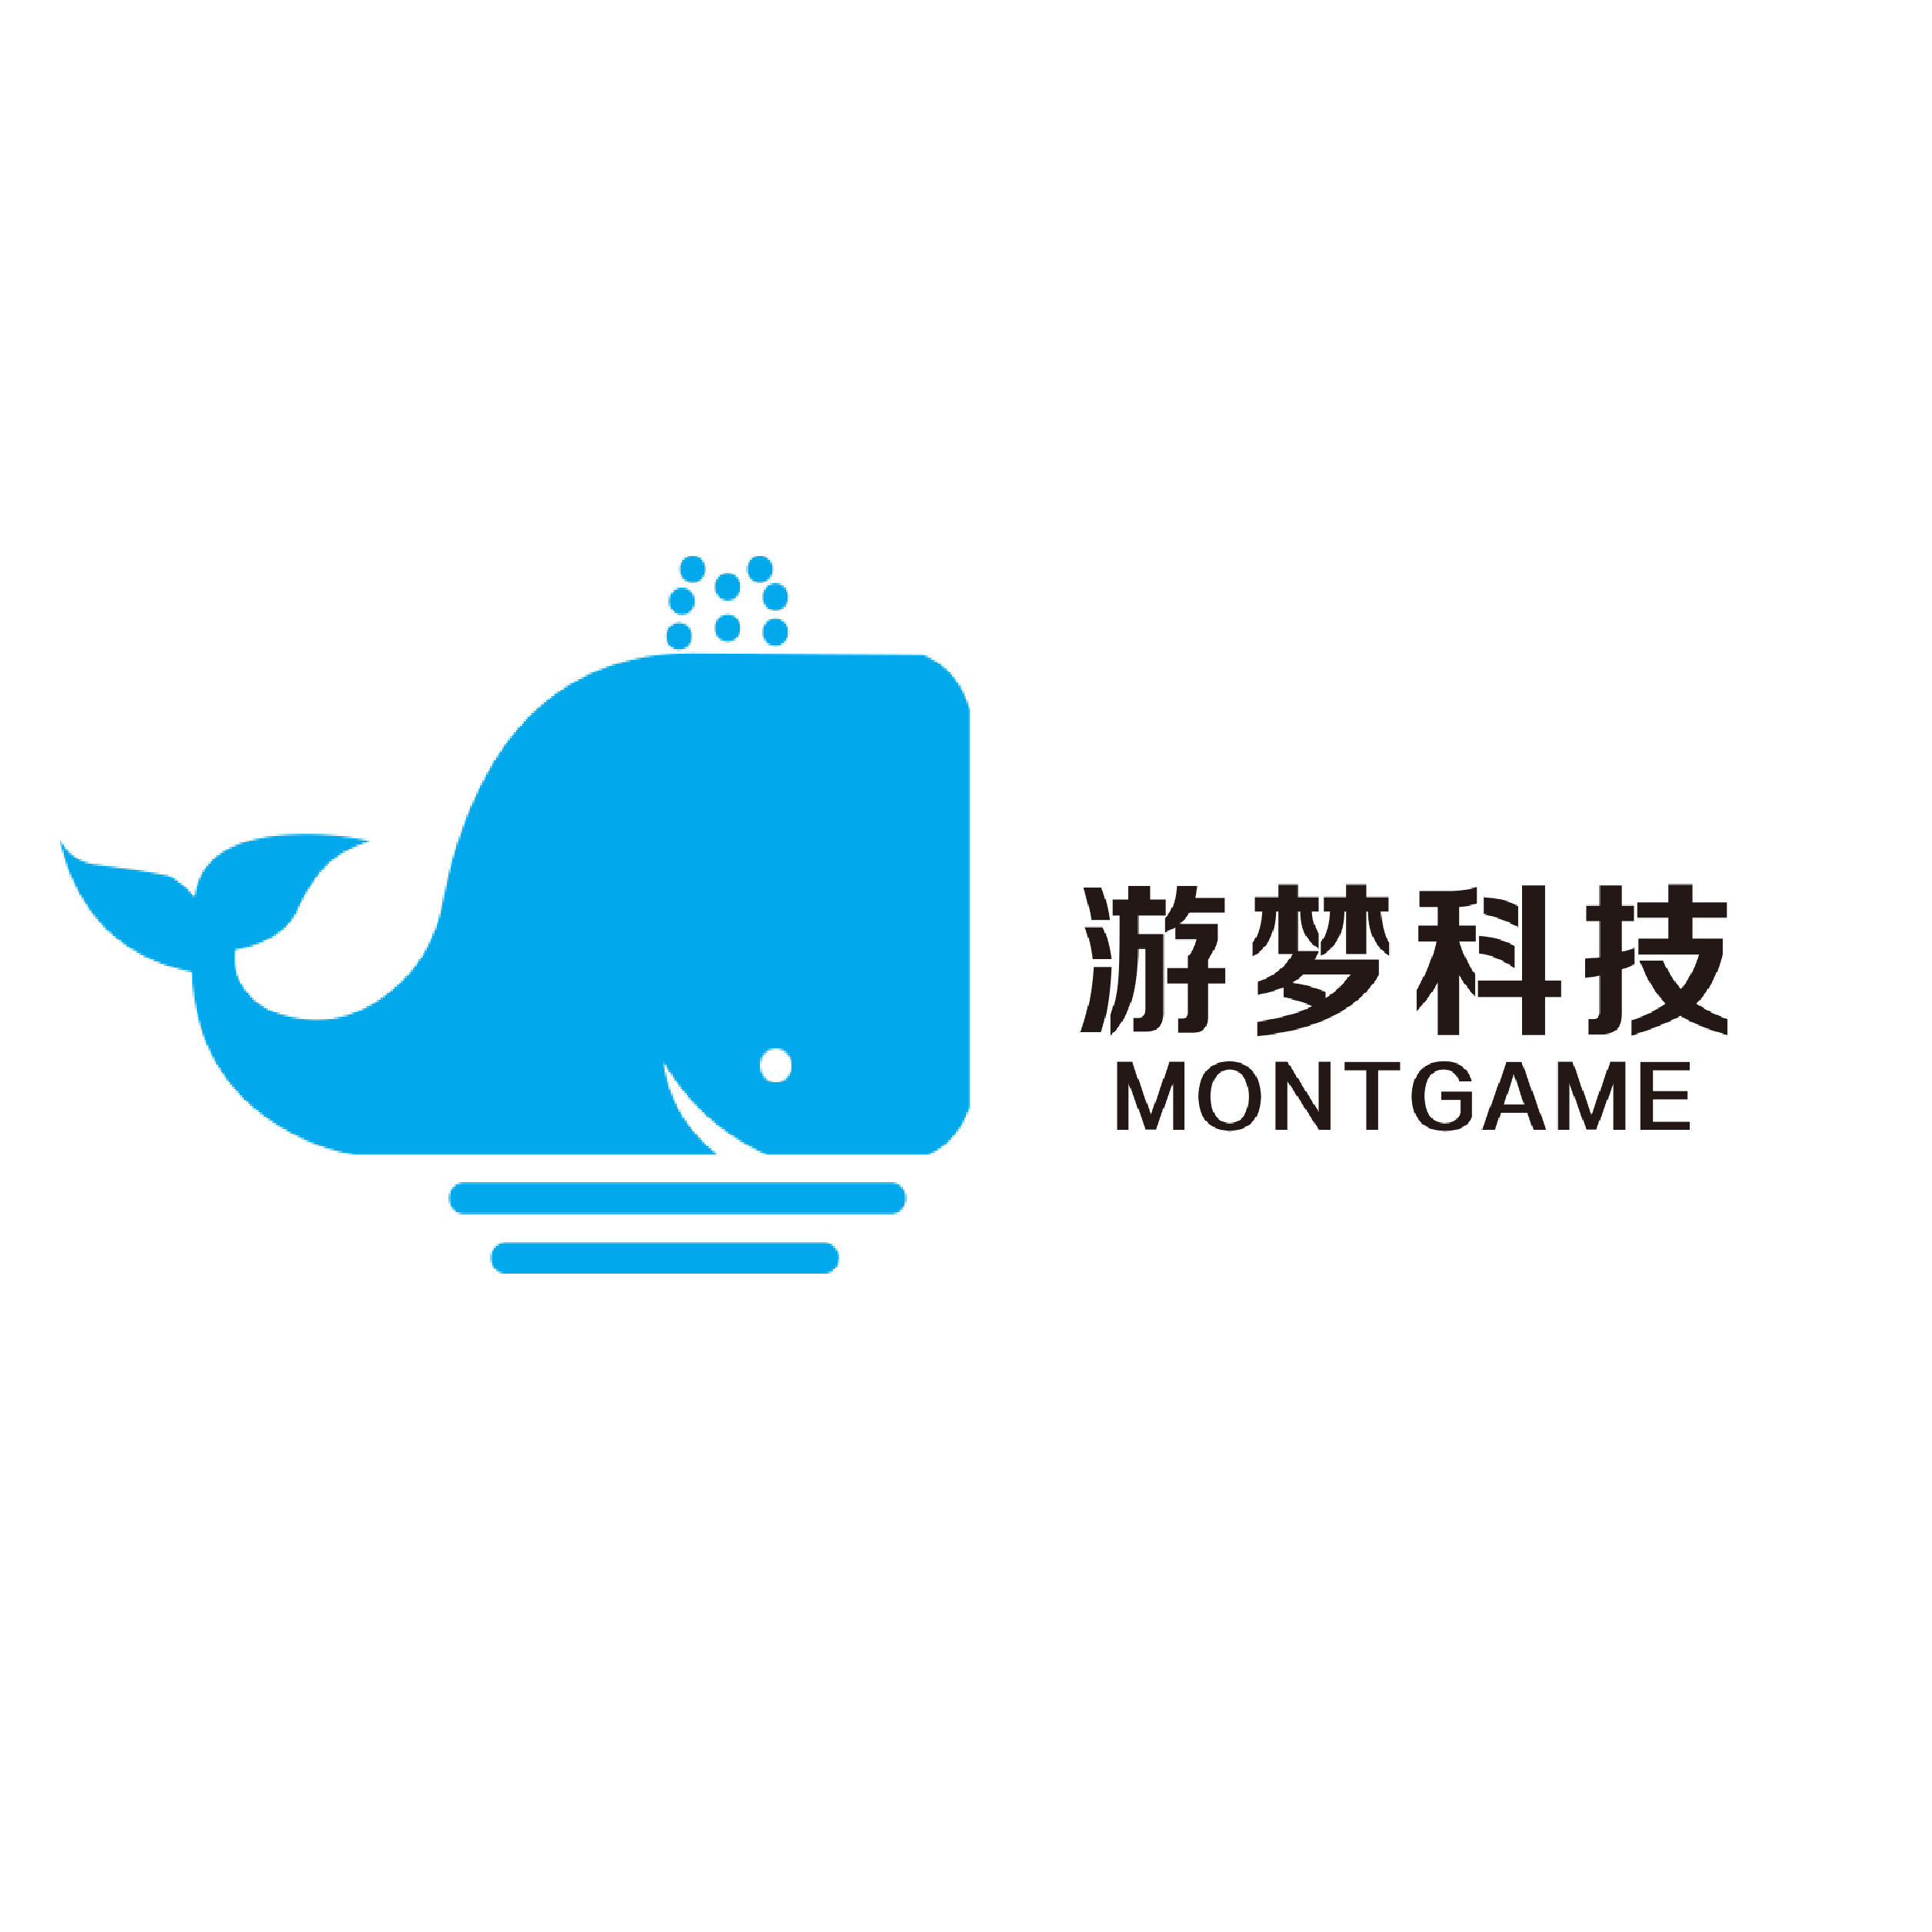 Montgame